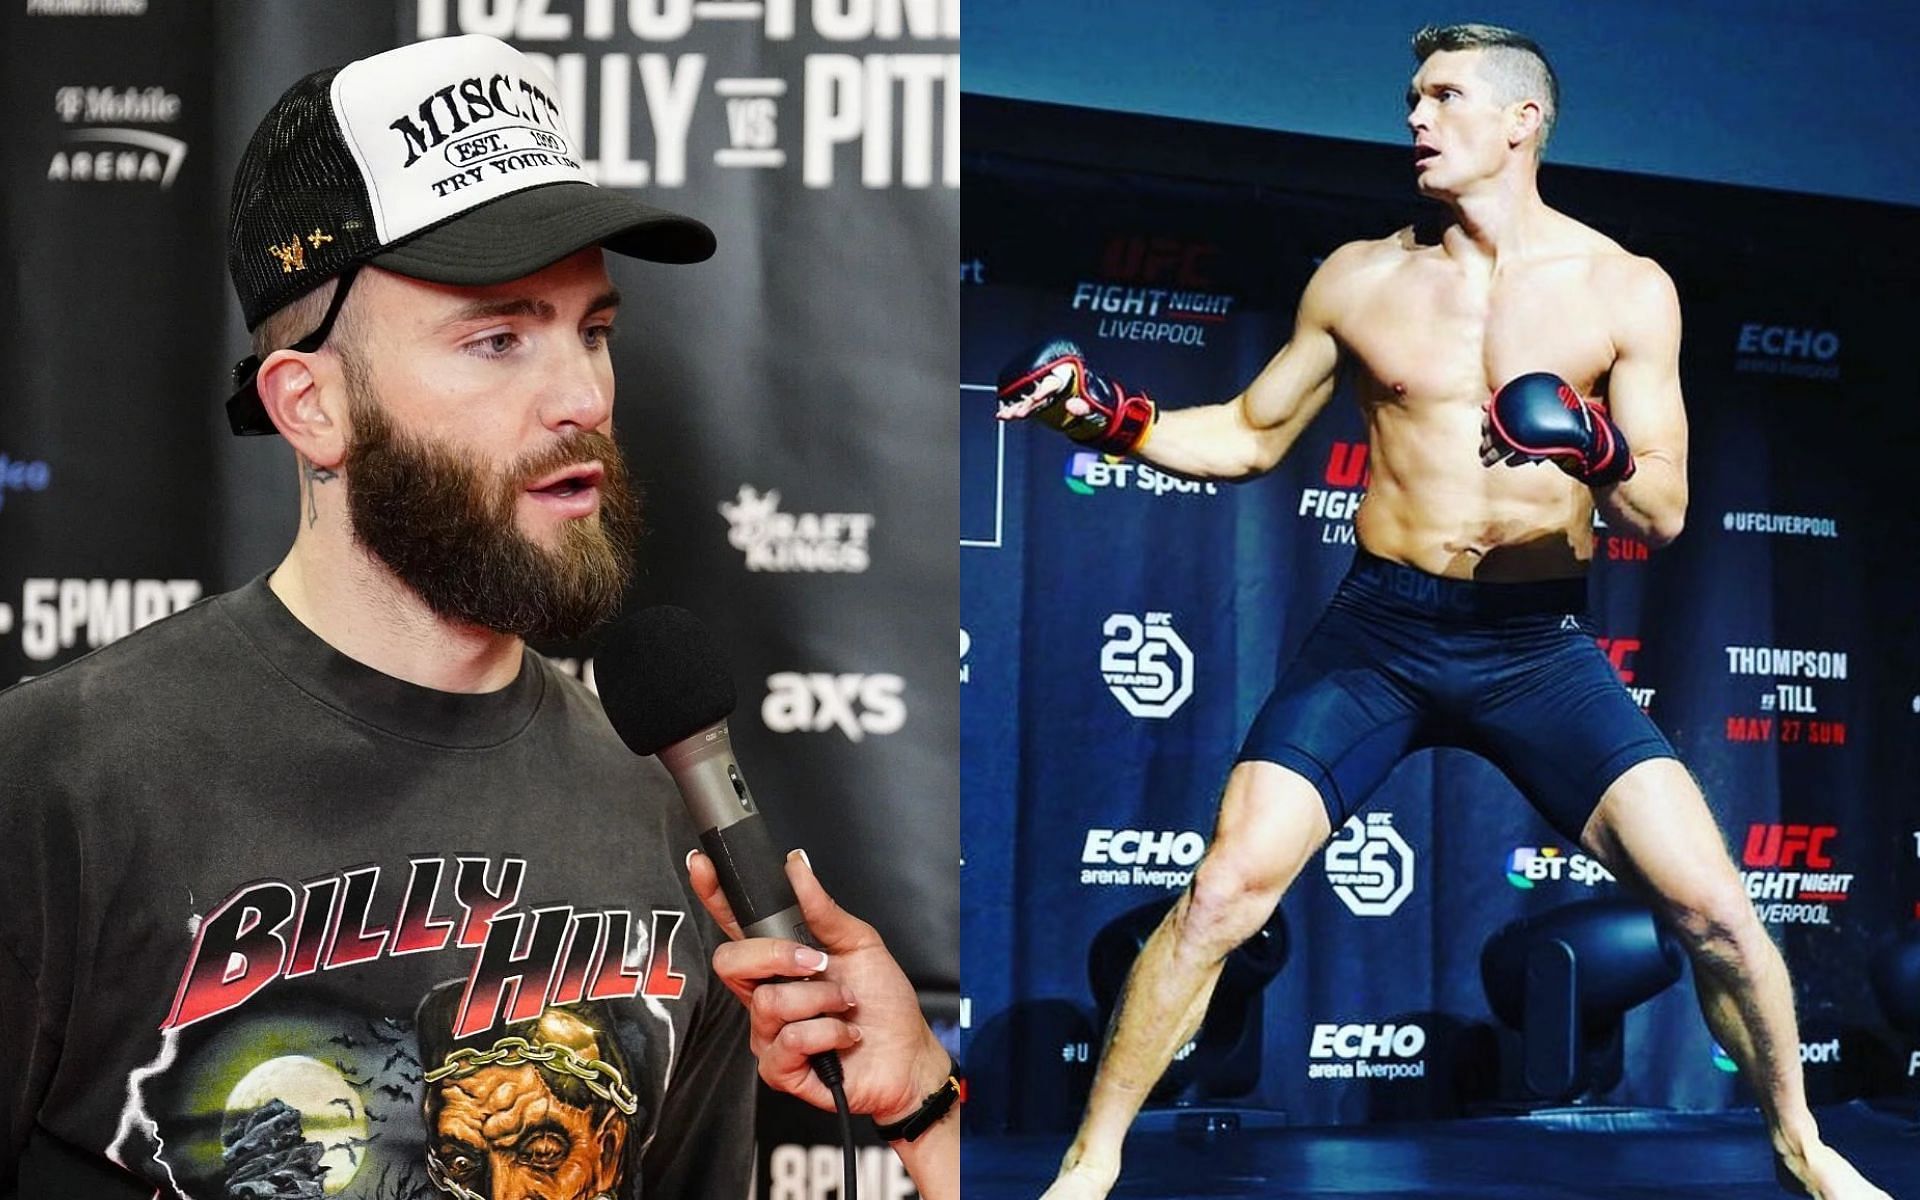 Caleb Plant (left) sheds light on taking part in kickboxing tournaments with Stephen Thompson (right) before turning to boxing [Images Courtesy: @GettyImages, @wonderboy on Instagram]